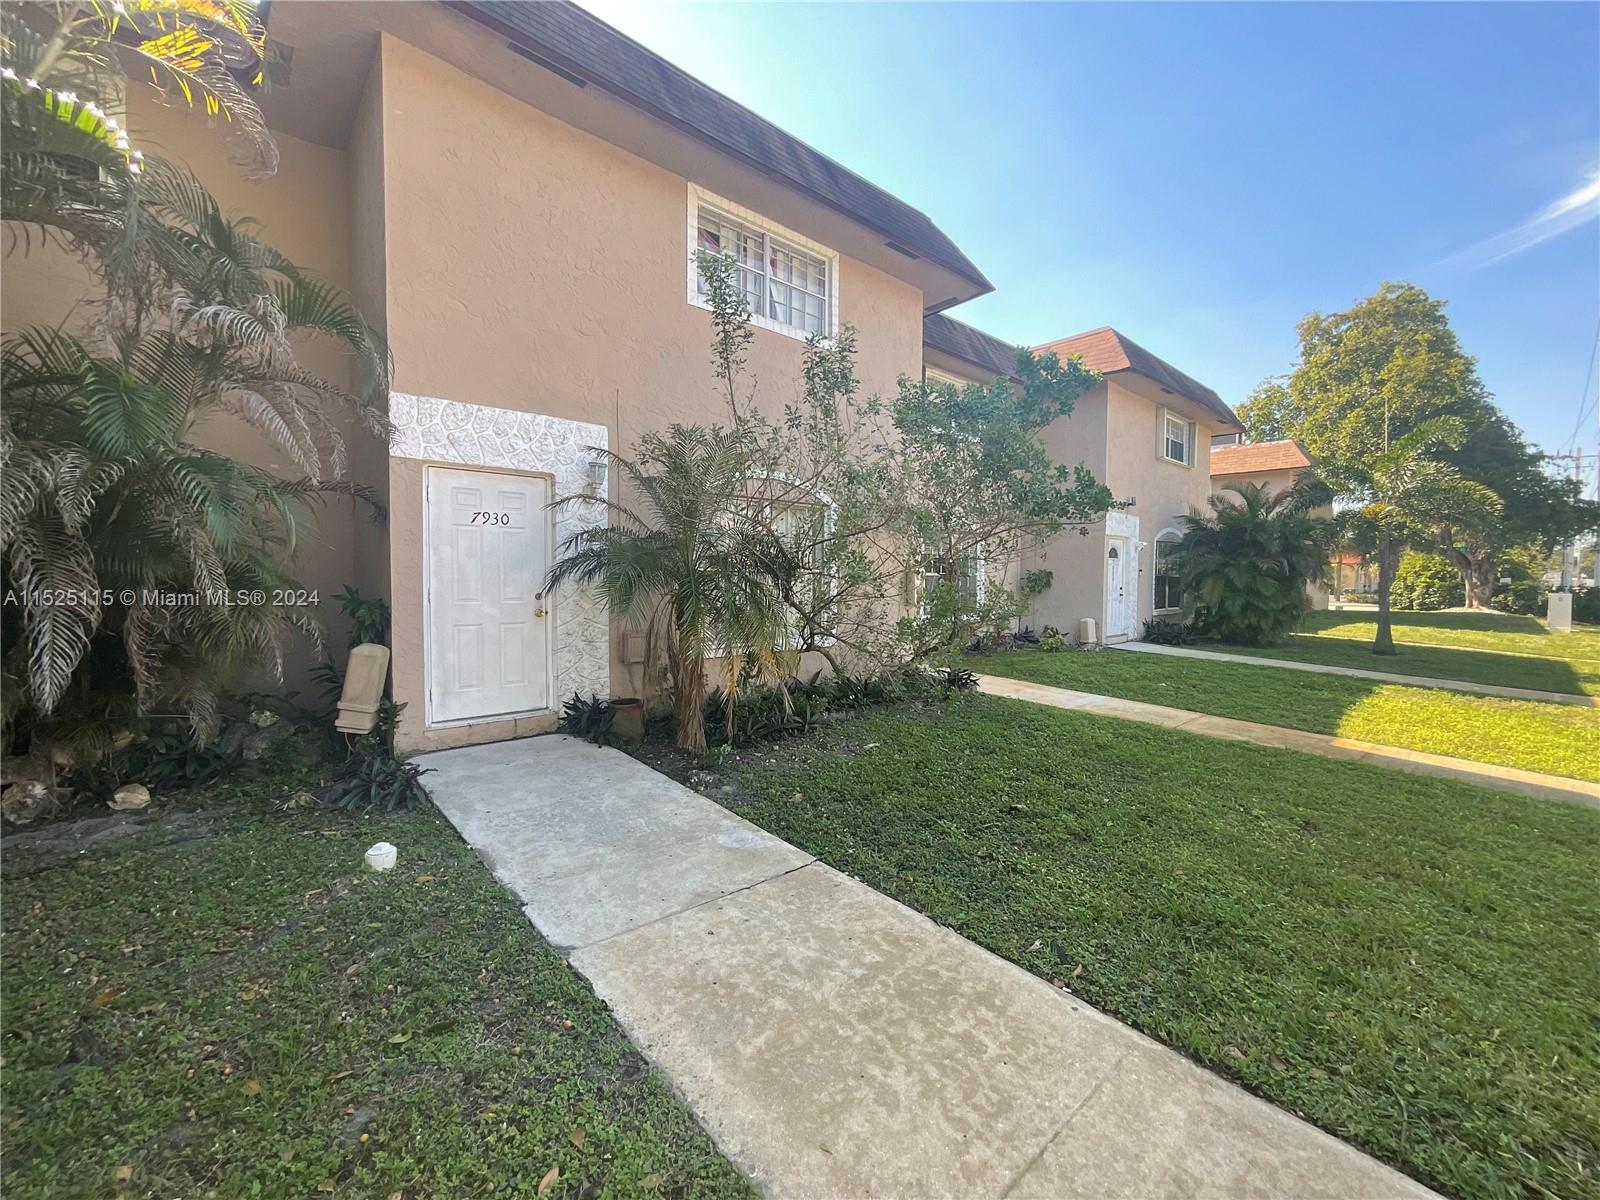 Photo of 7930 Kimberly Blvd #204 in North Lauderdale, FL